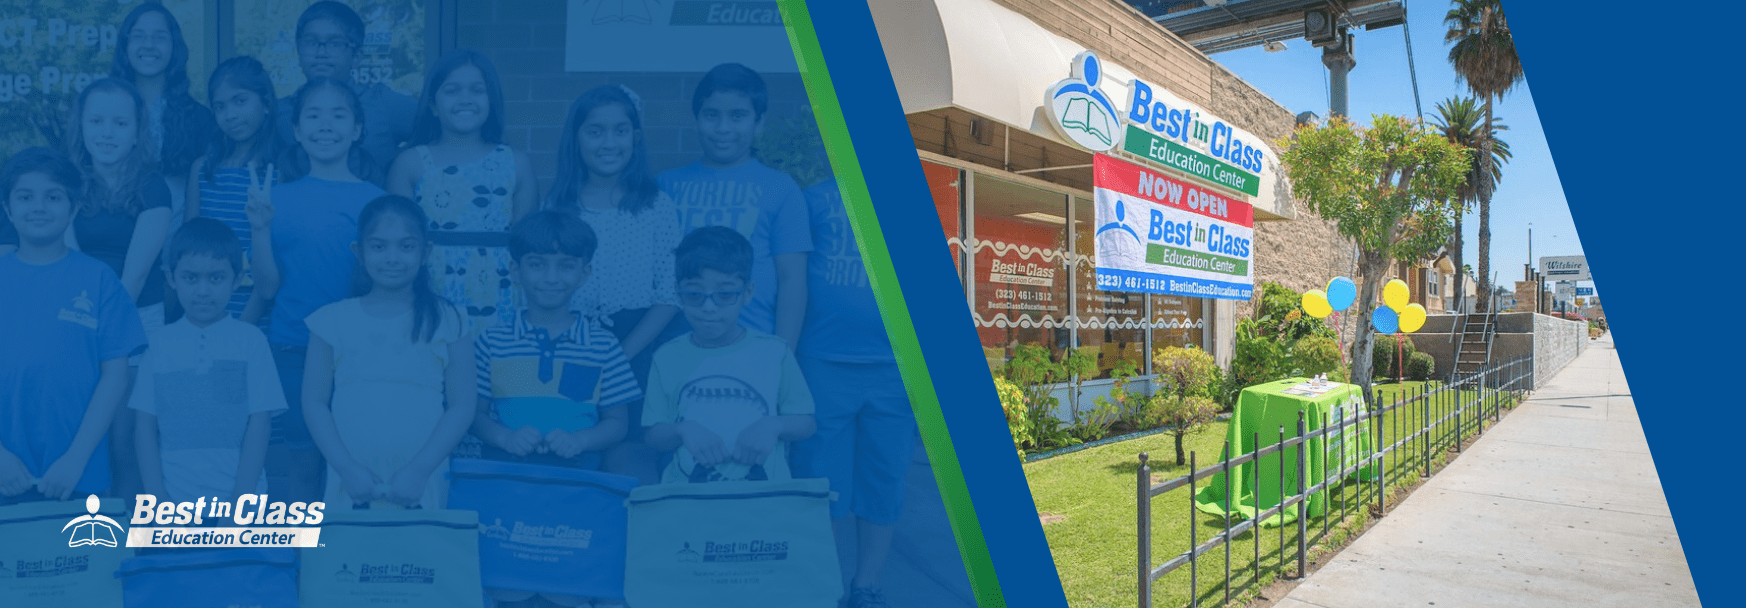 7 Compelling Reasons to Start a Children’s Education Franchise with Best in Class Education Center